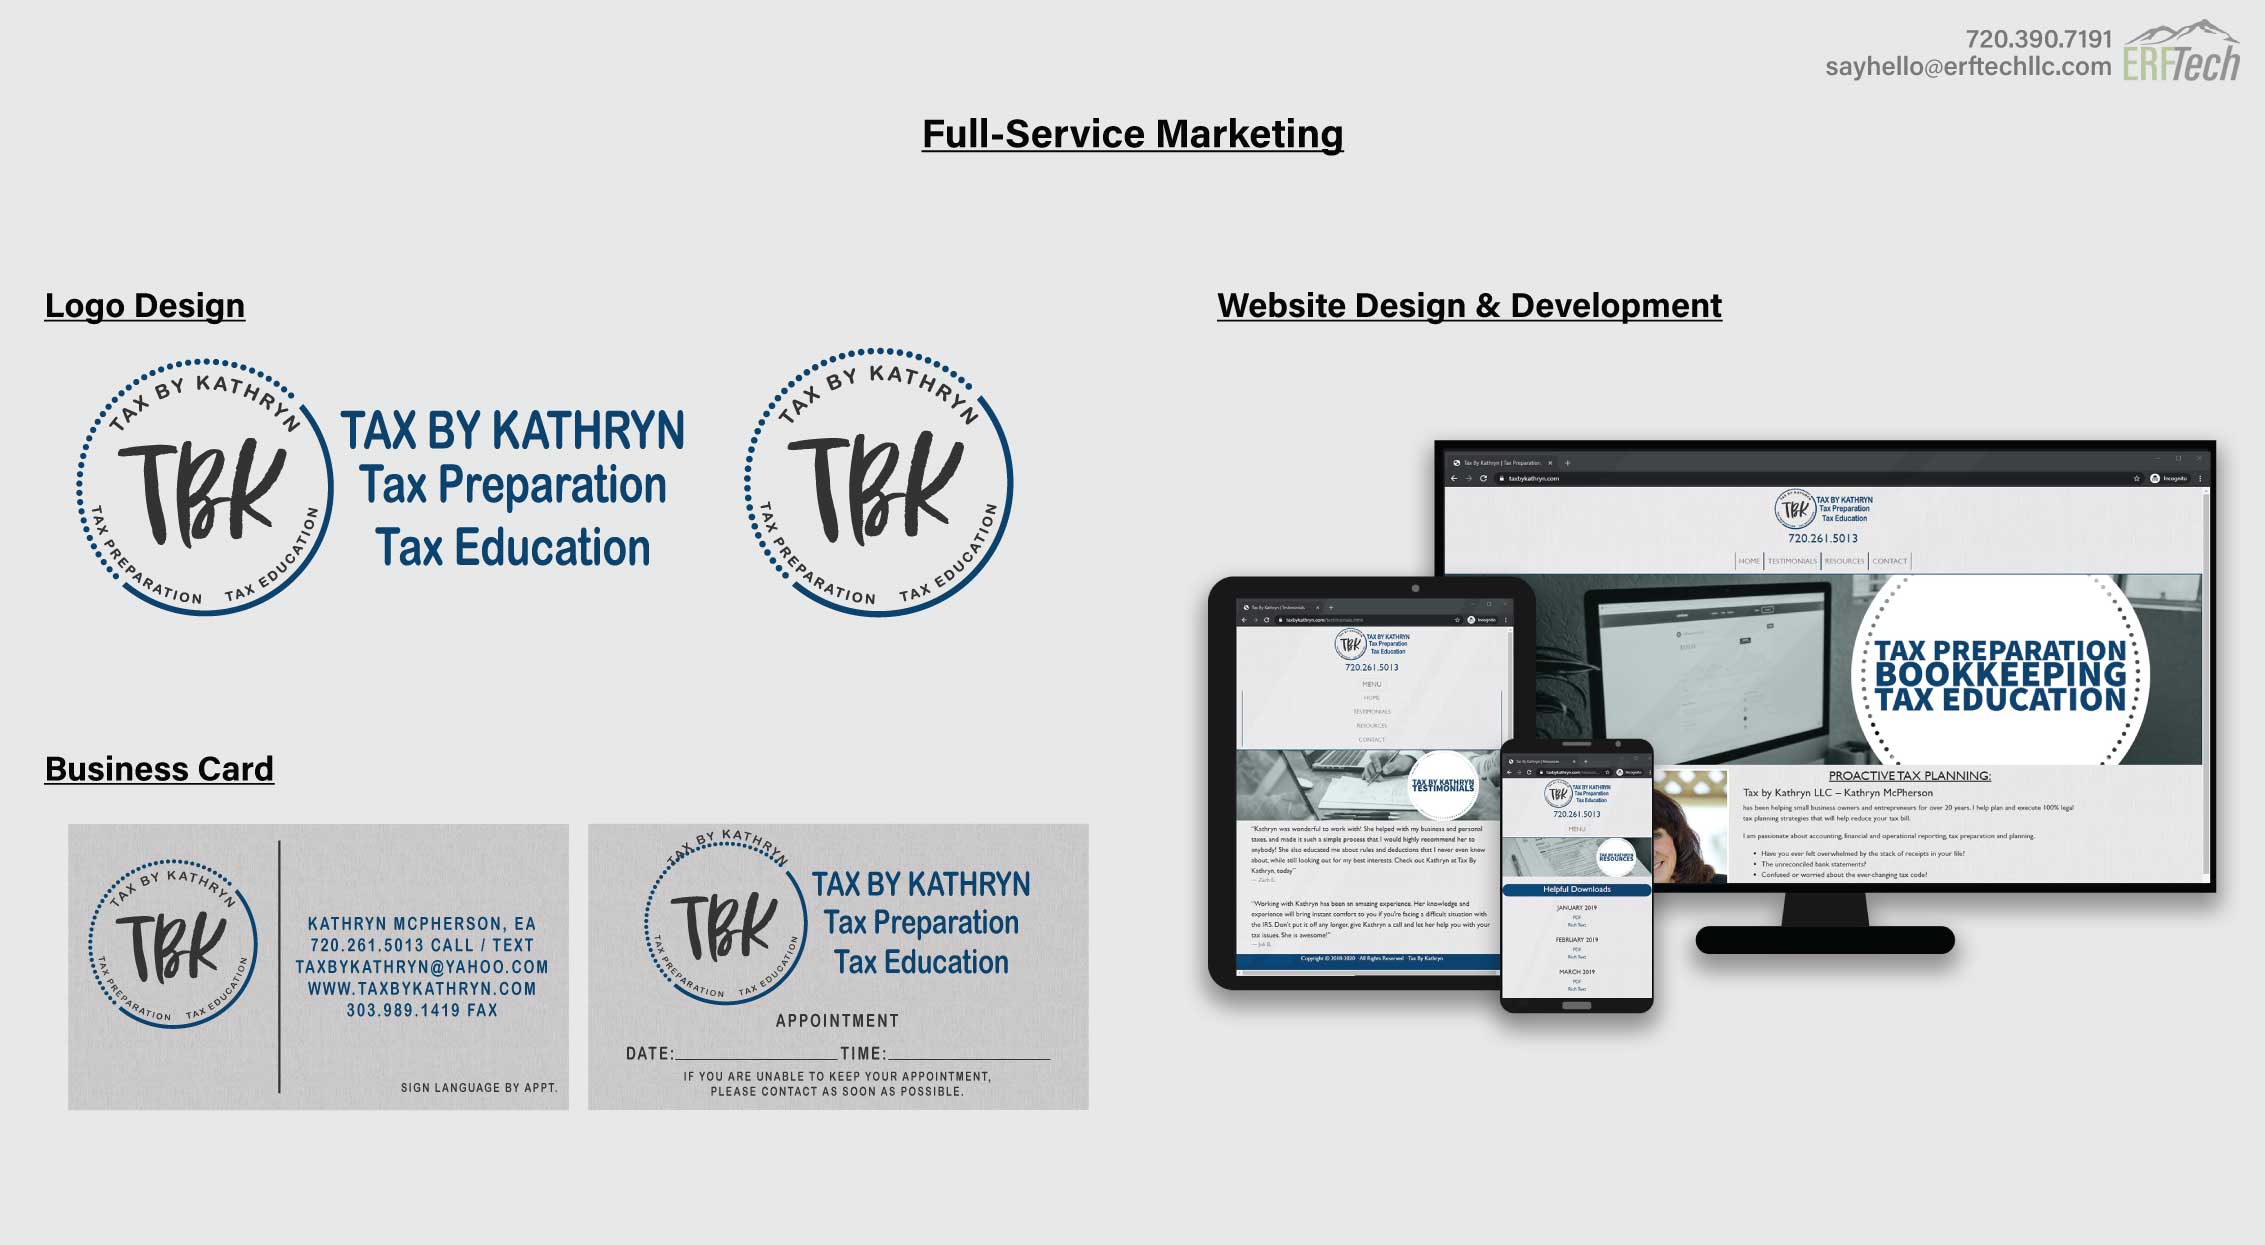 Full-Service Marketing for Tax by Kathryn in Lakewood, CO